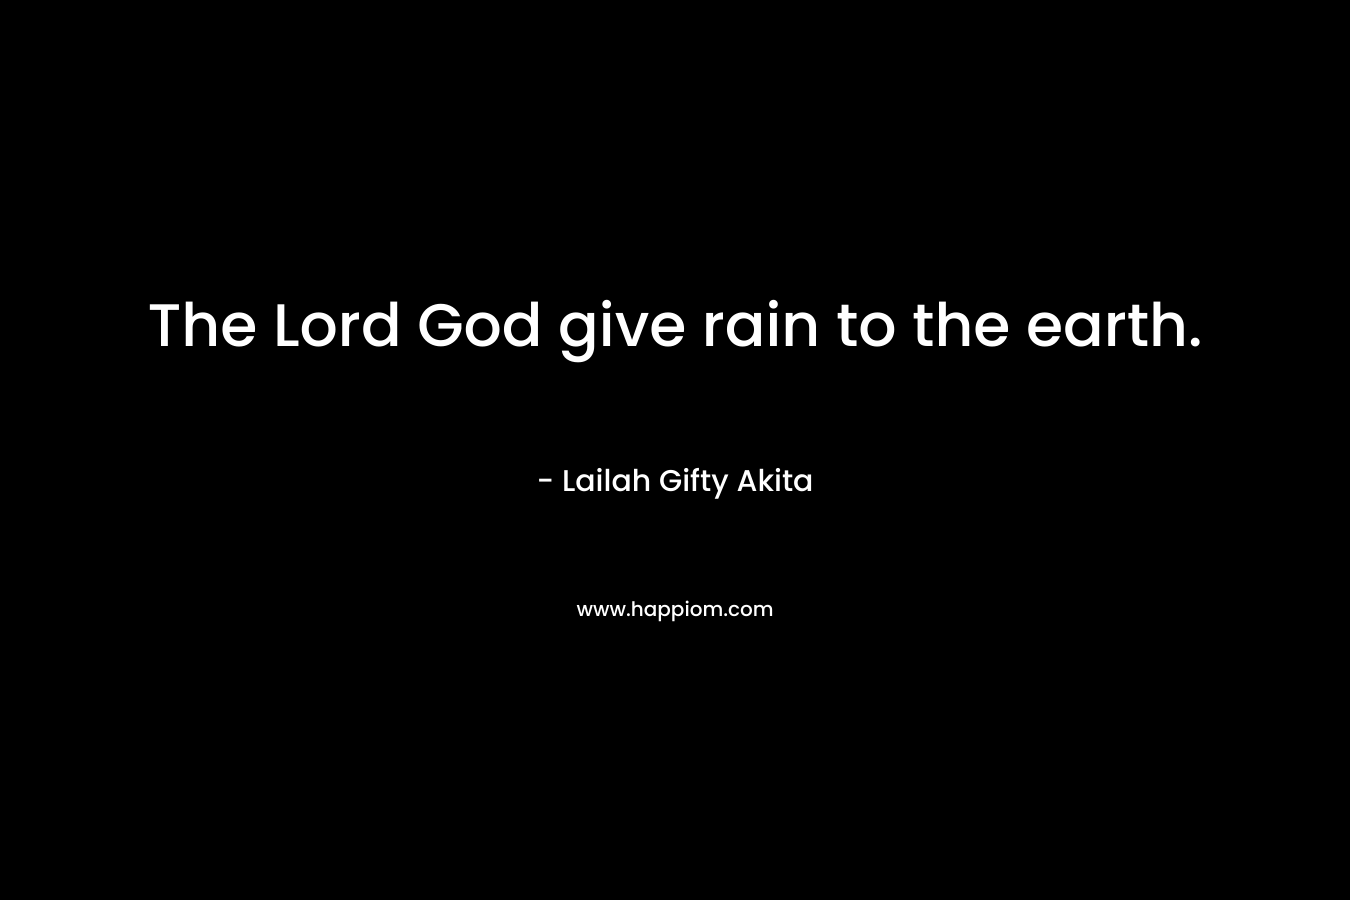 The Lord God give rain to the earth.